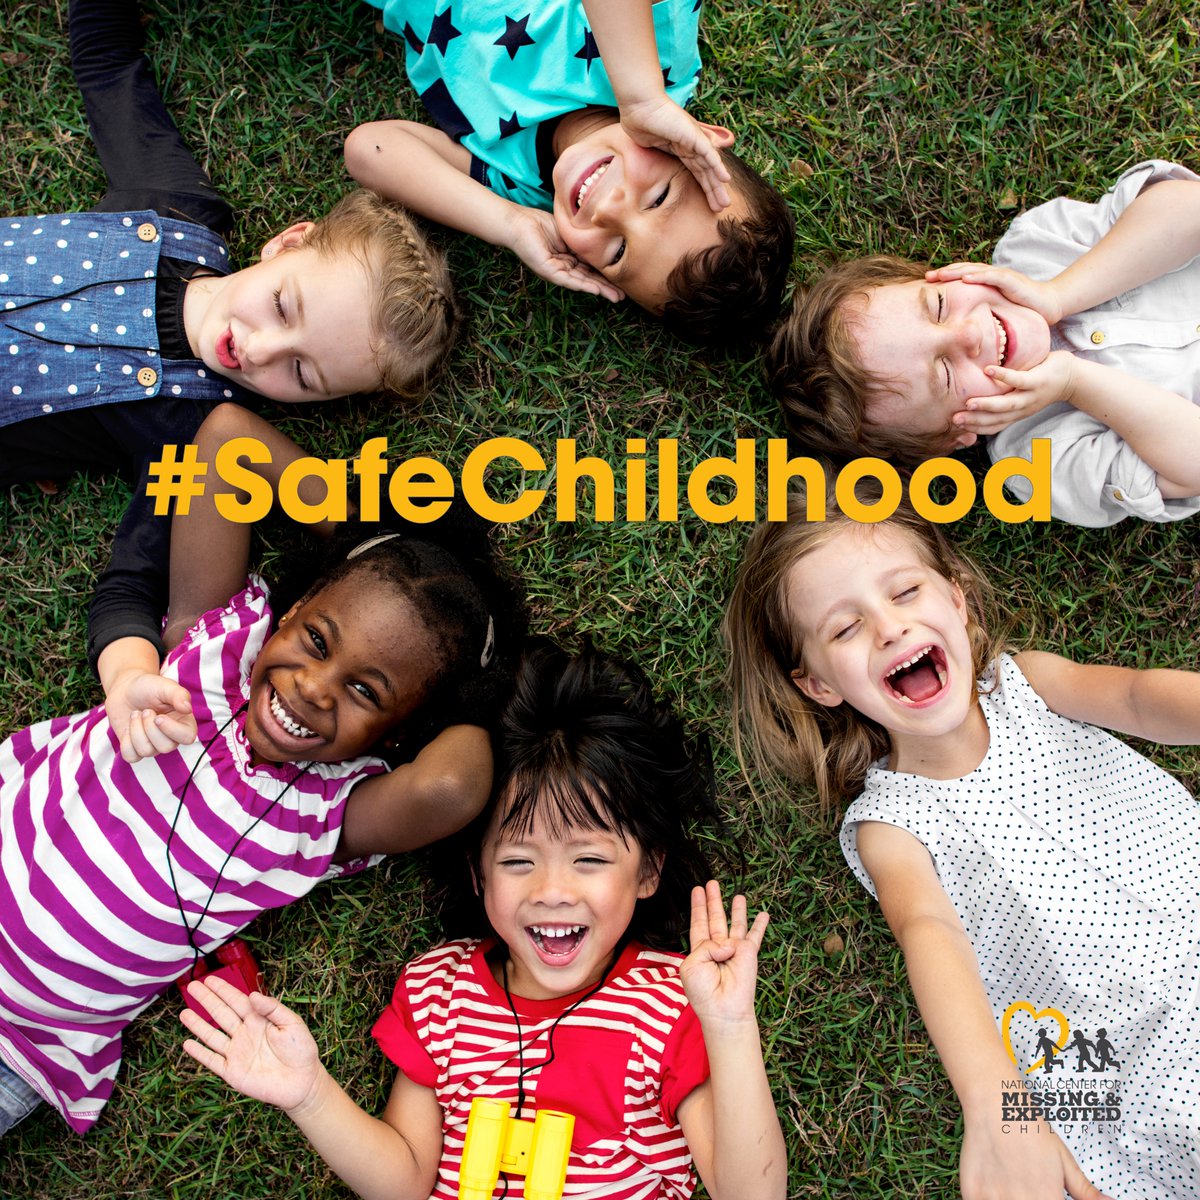 NCMEC is proud to have worked with our partners on getting the REPORT Act passed into law. Together, we can ensure that every child has a #safechildhood. @IJM, @NCOSE, @GLFOP, @ChildFund, @Raven_Assoc, @WeAreWiredHuman, @PactWorld